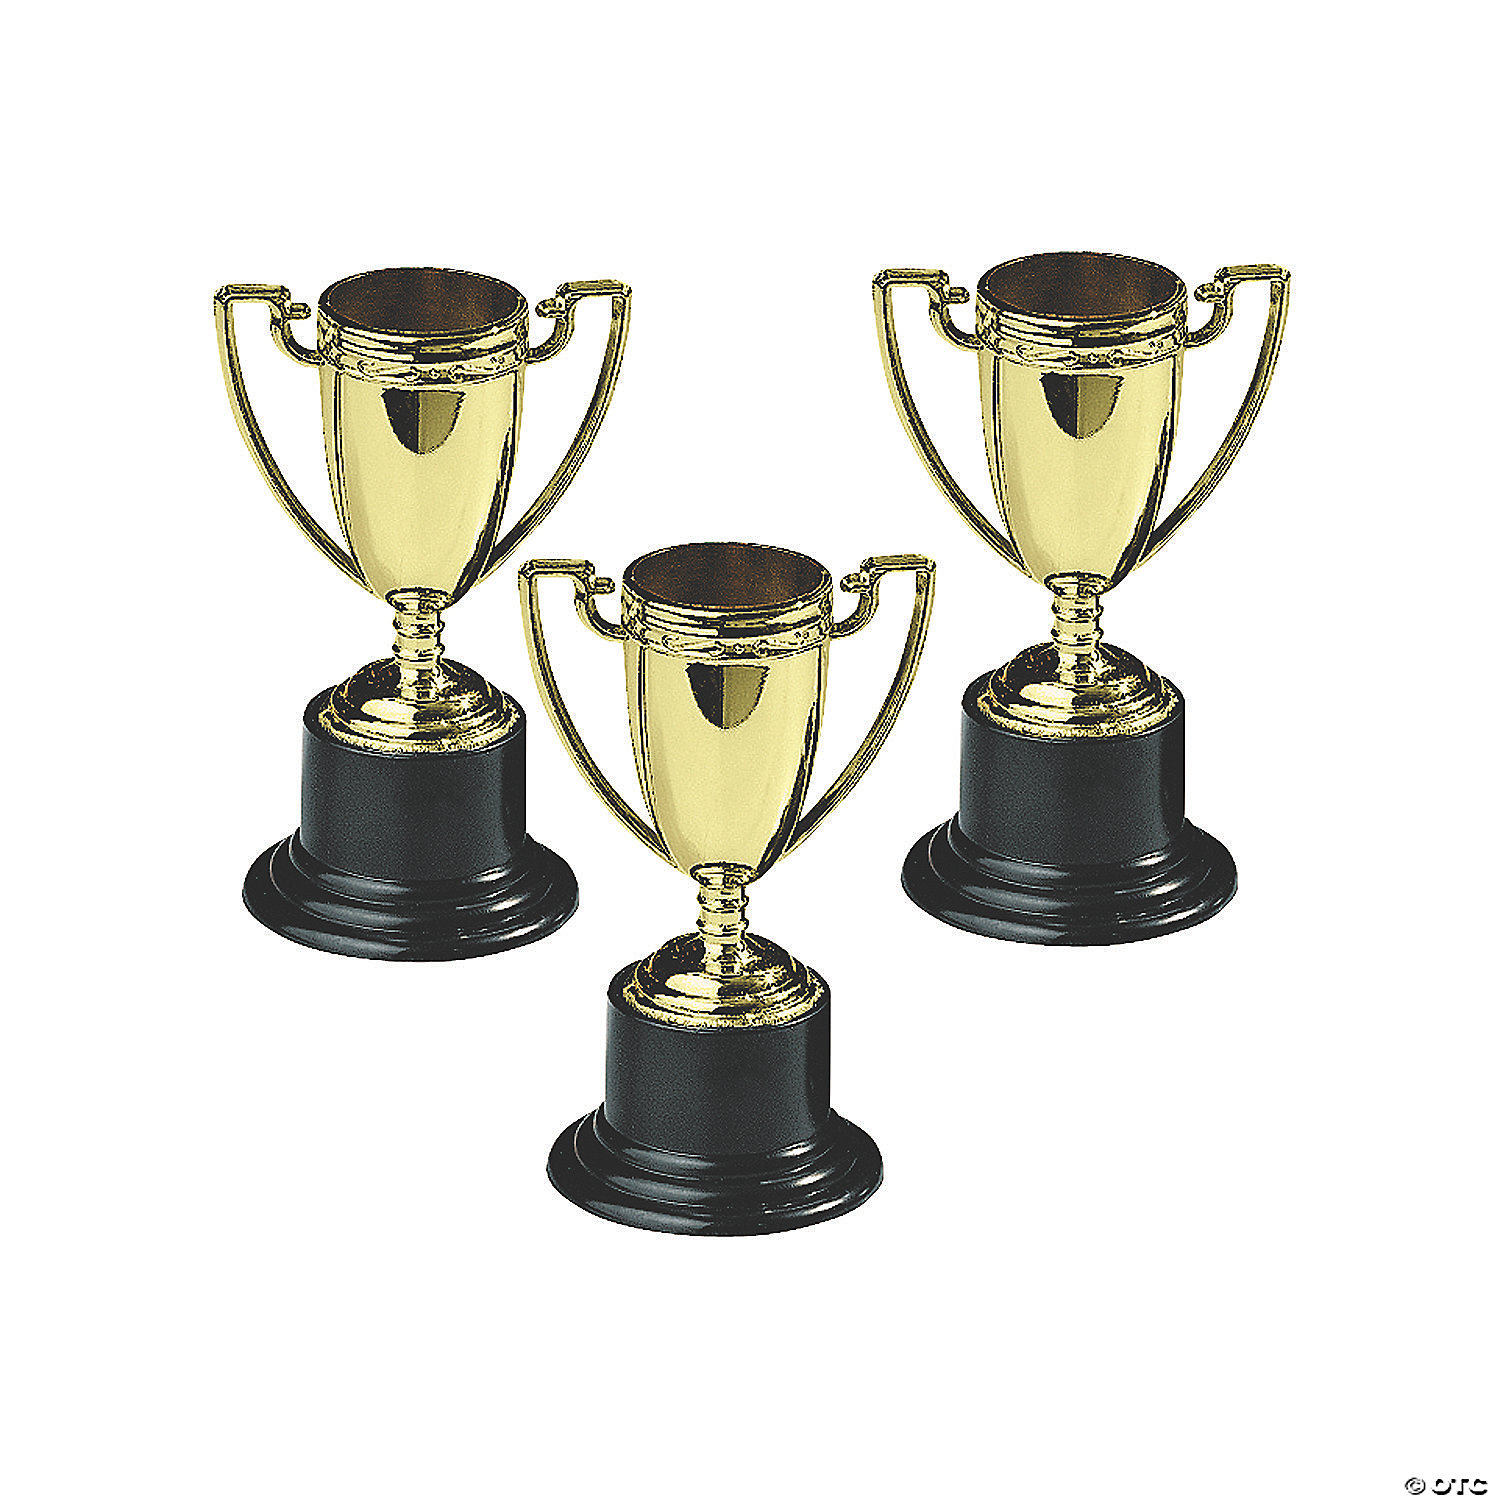 SCIENCE CHILDS CHILDREN TROPHY LABORATORY ENGRAVED FREE MINI STAR TROPHIES 